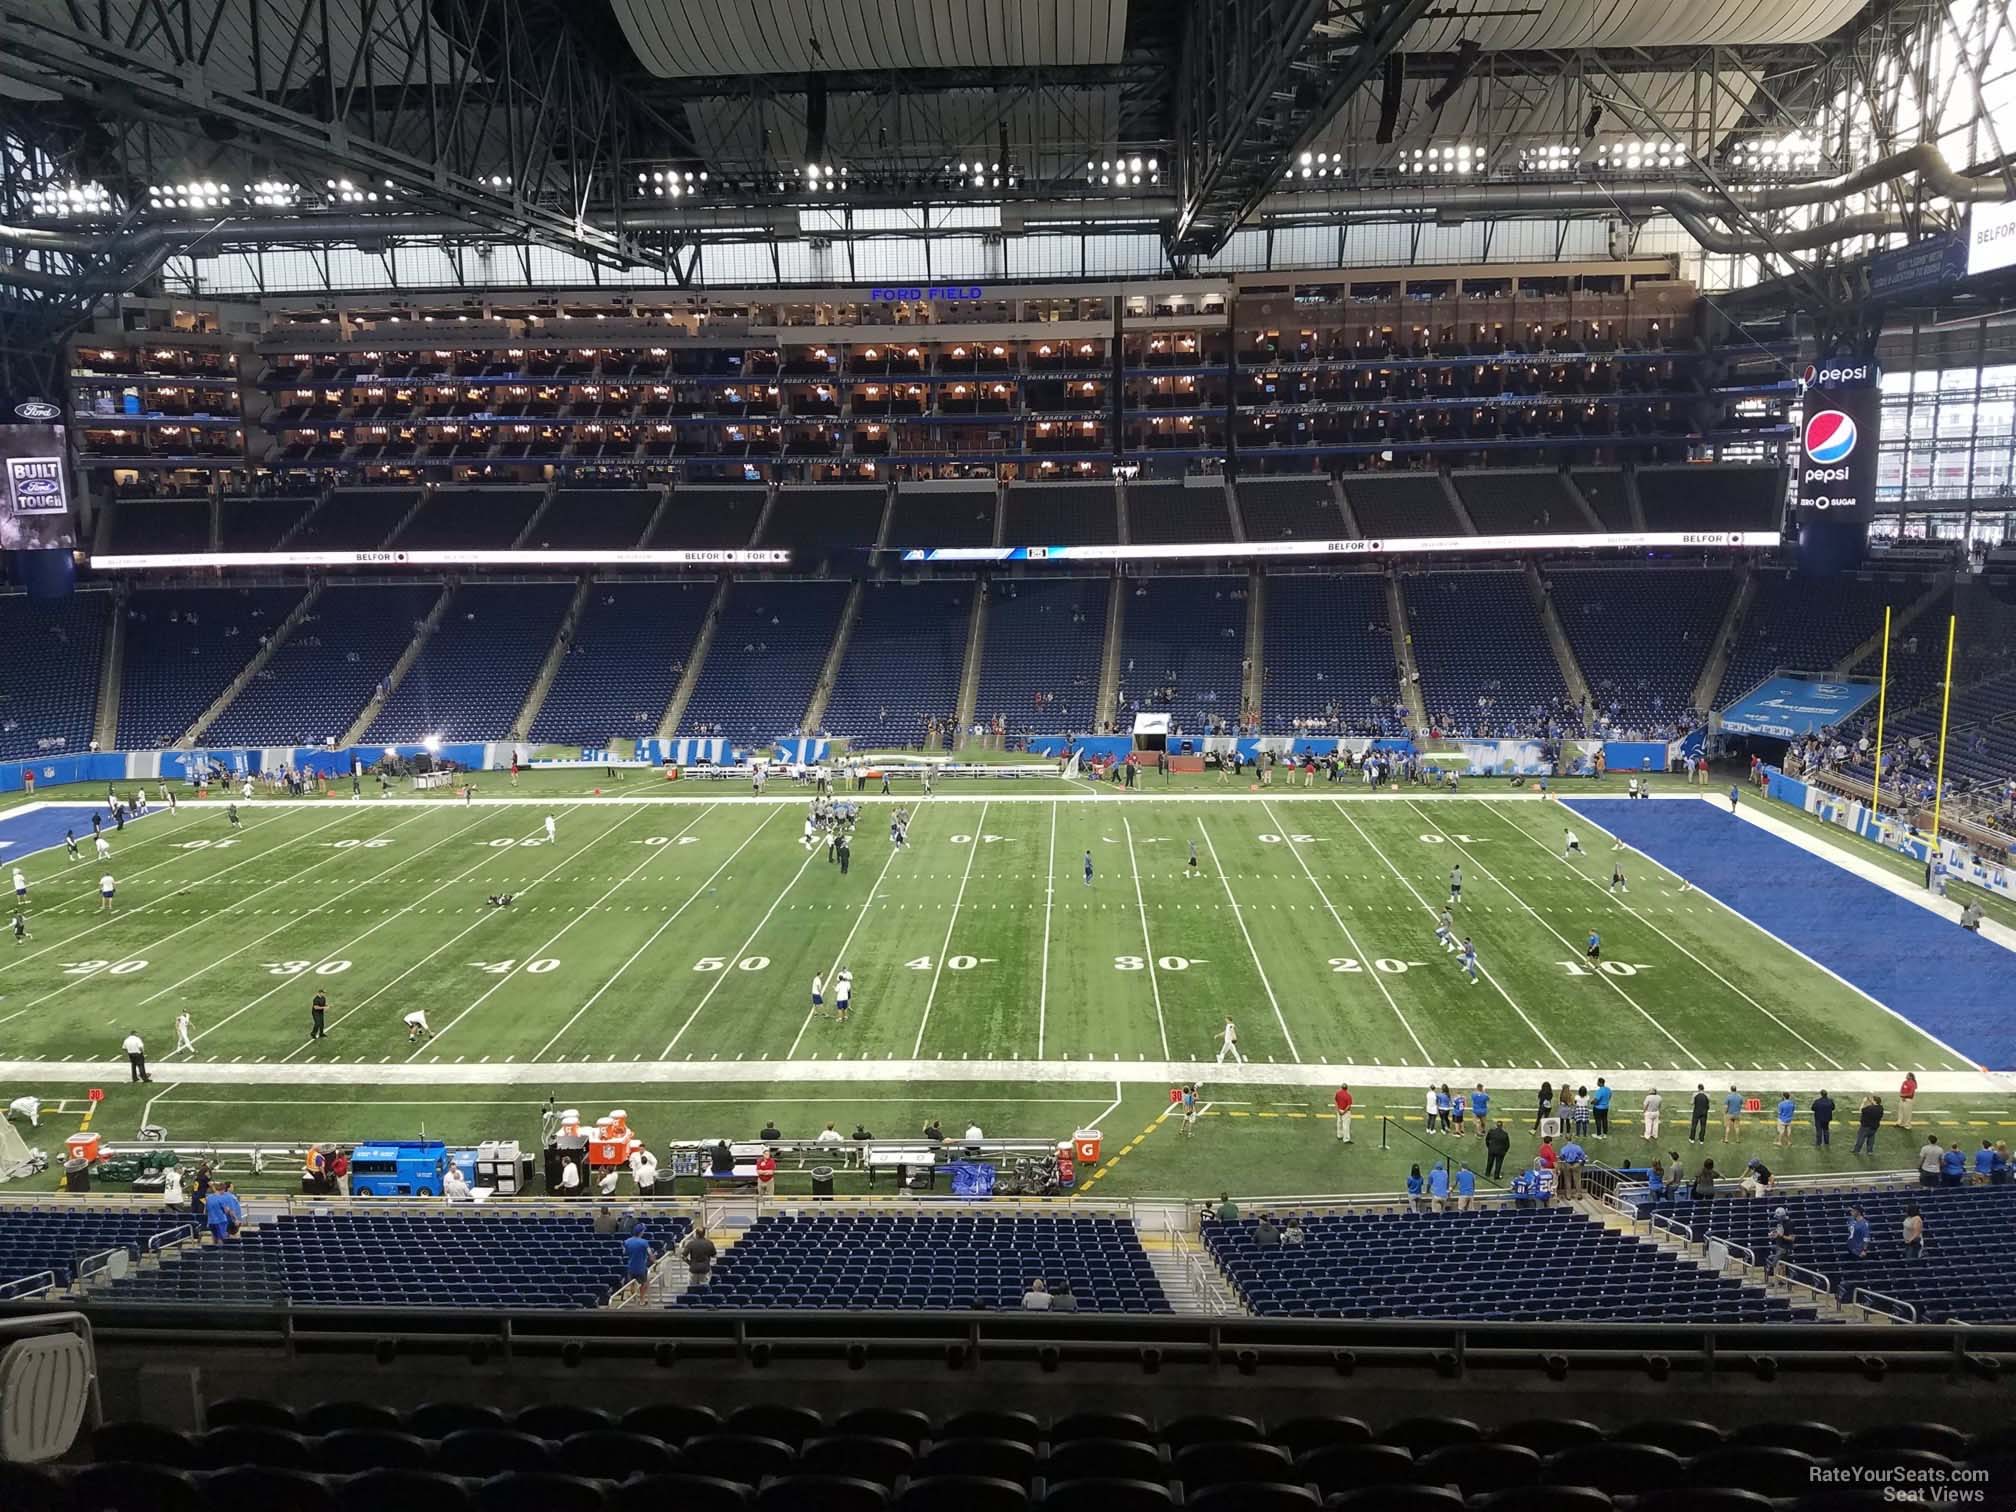 section 232, row 10 seat view  for football - ford field